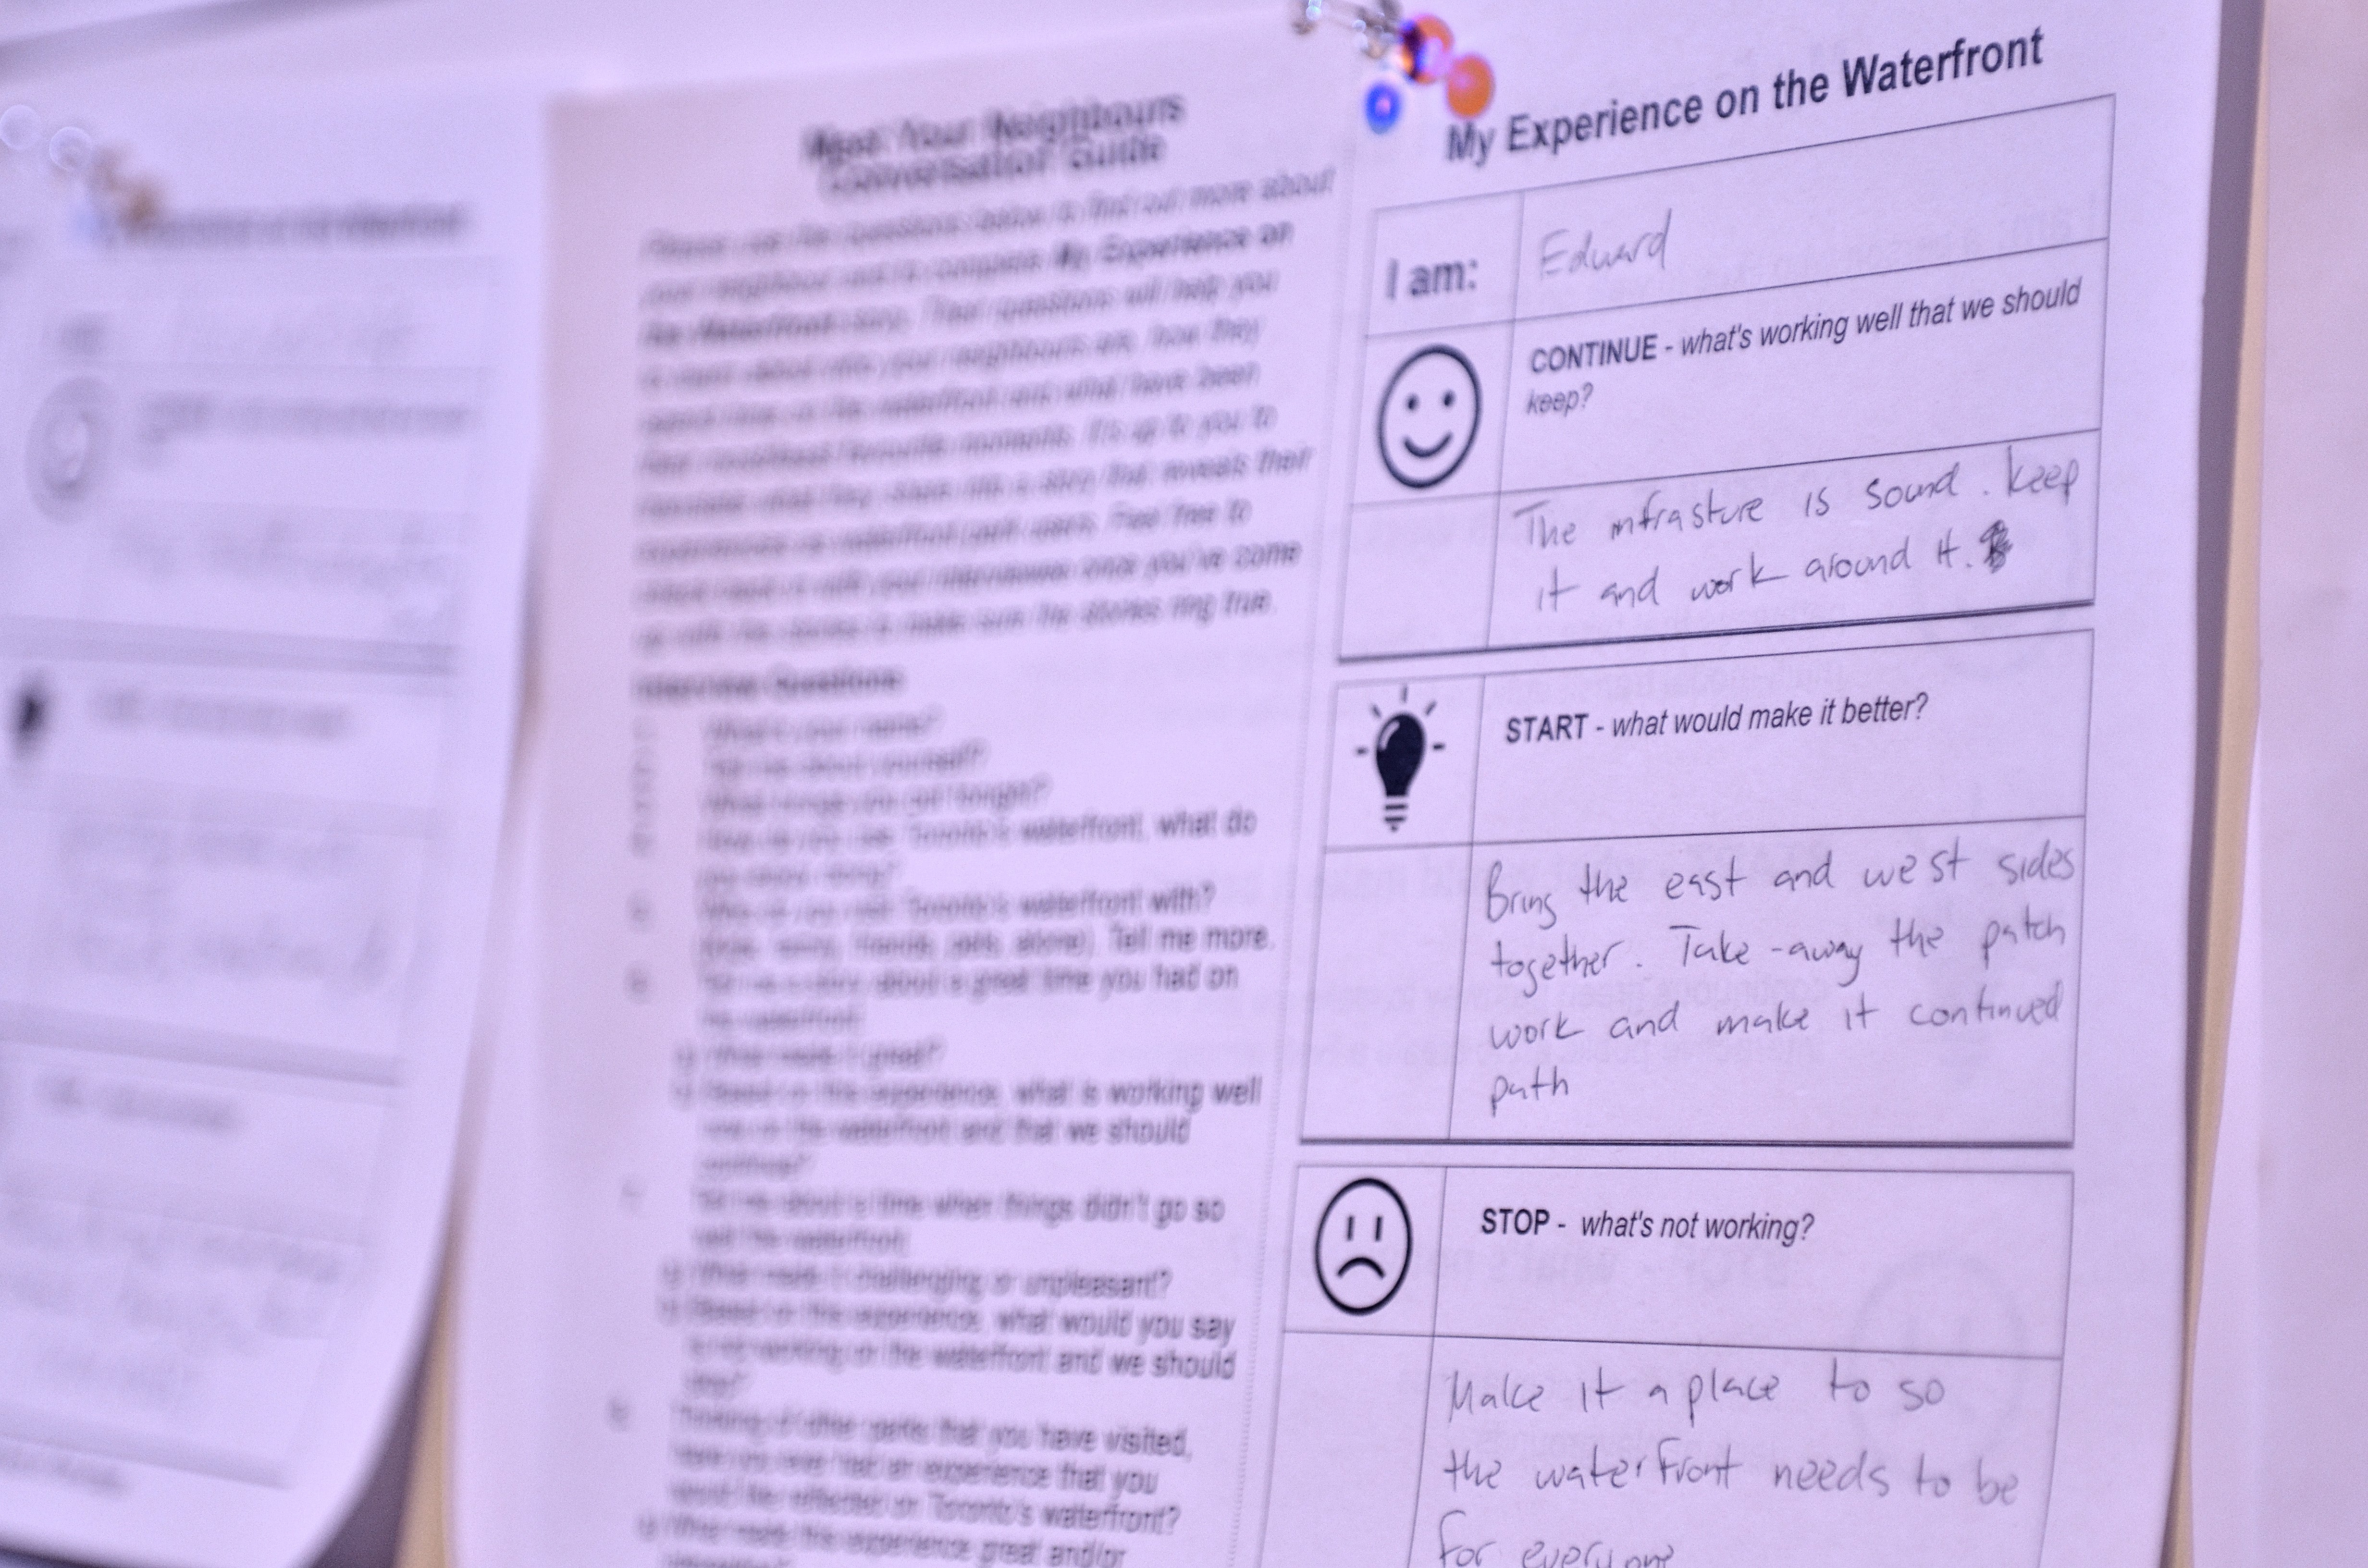 close-up of written worksheets from a public consultation